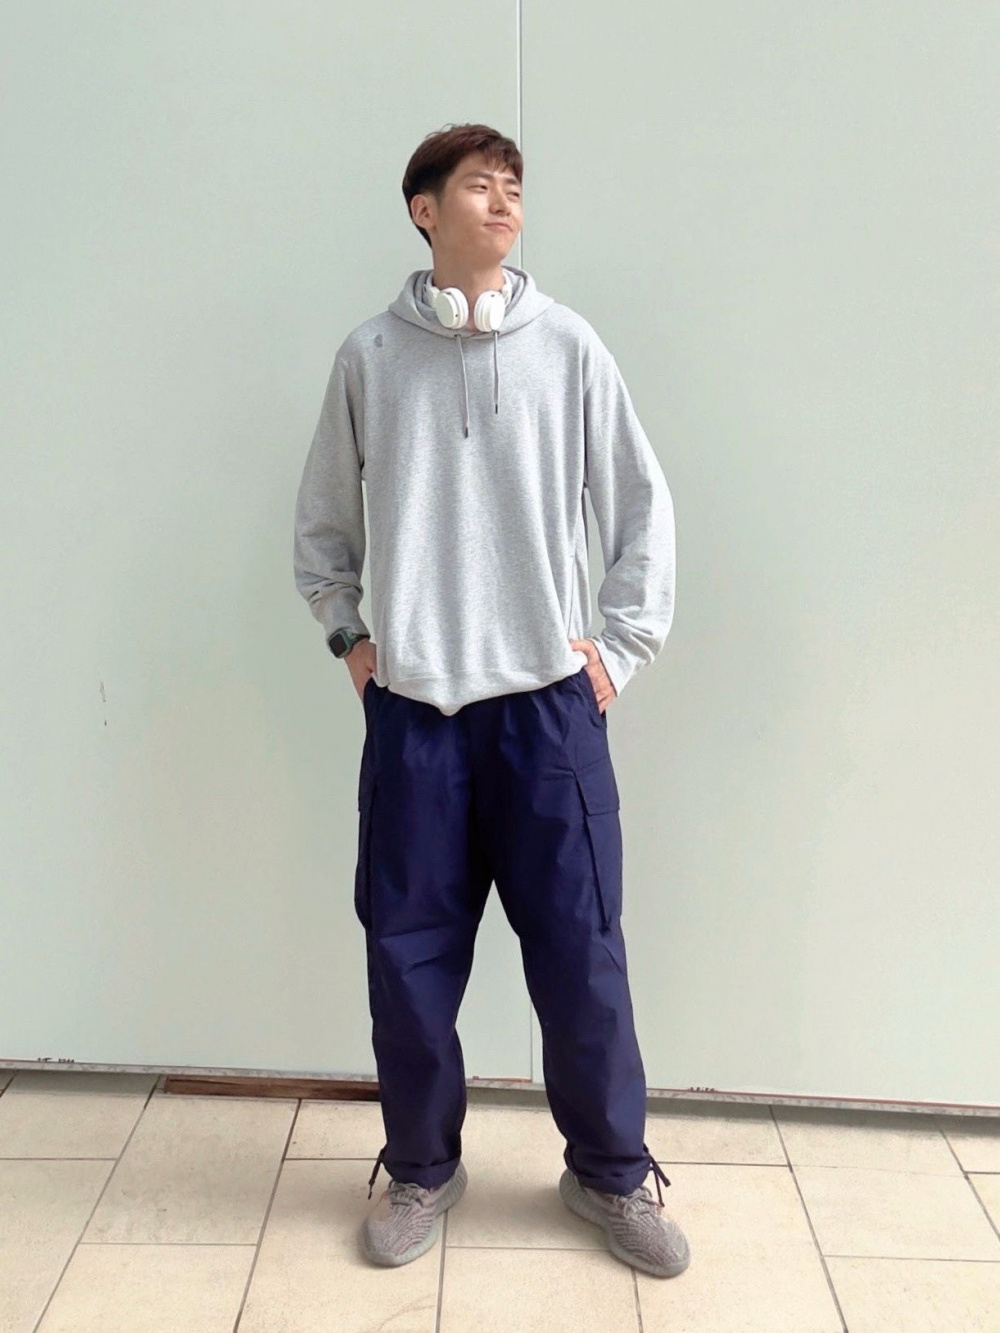 sweatpants outfit for school